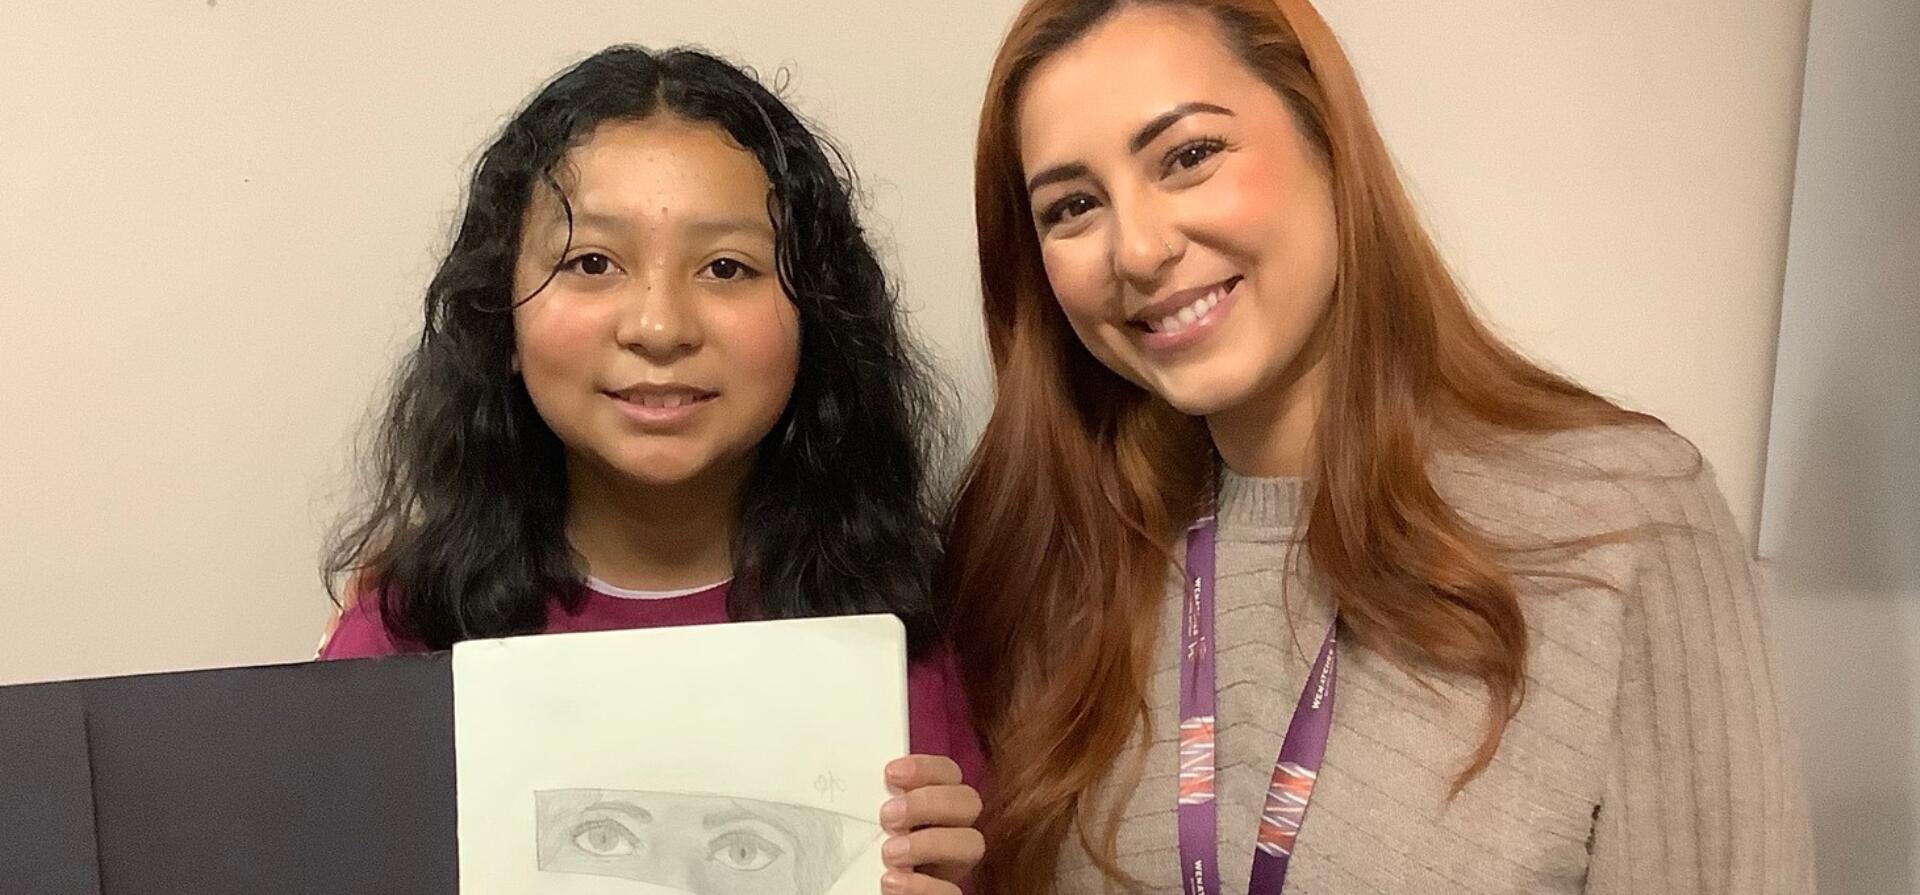  Anahi Rios Wins First Place in SkillsUSA Art Competition